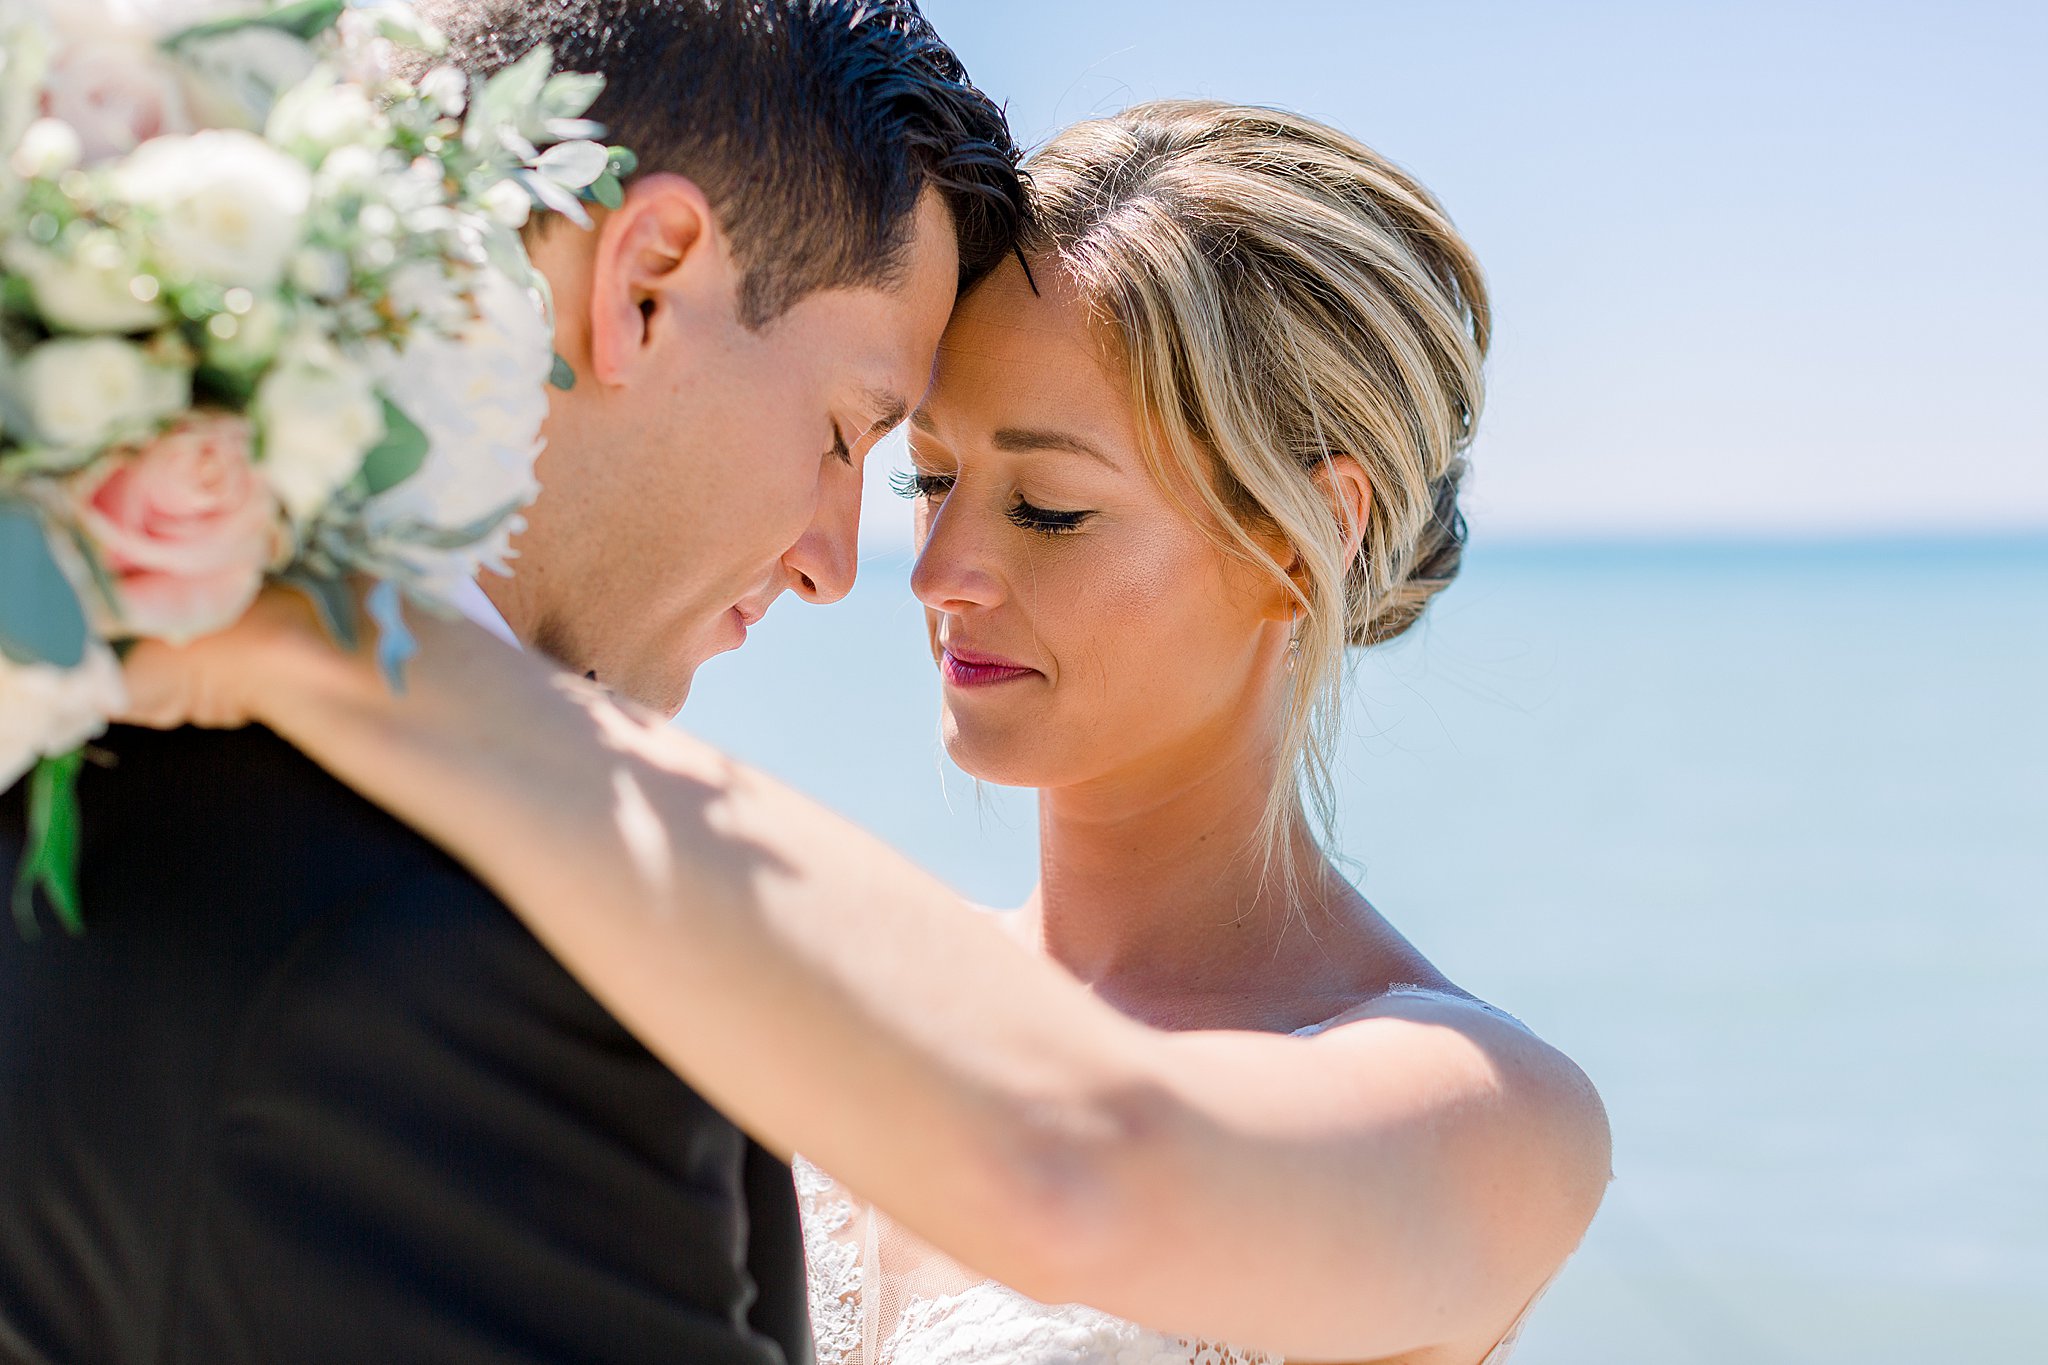 Bride and groom share a quite moment at the beach during their intimate Lake Michigan wedding in Northern Michigan.